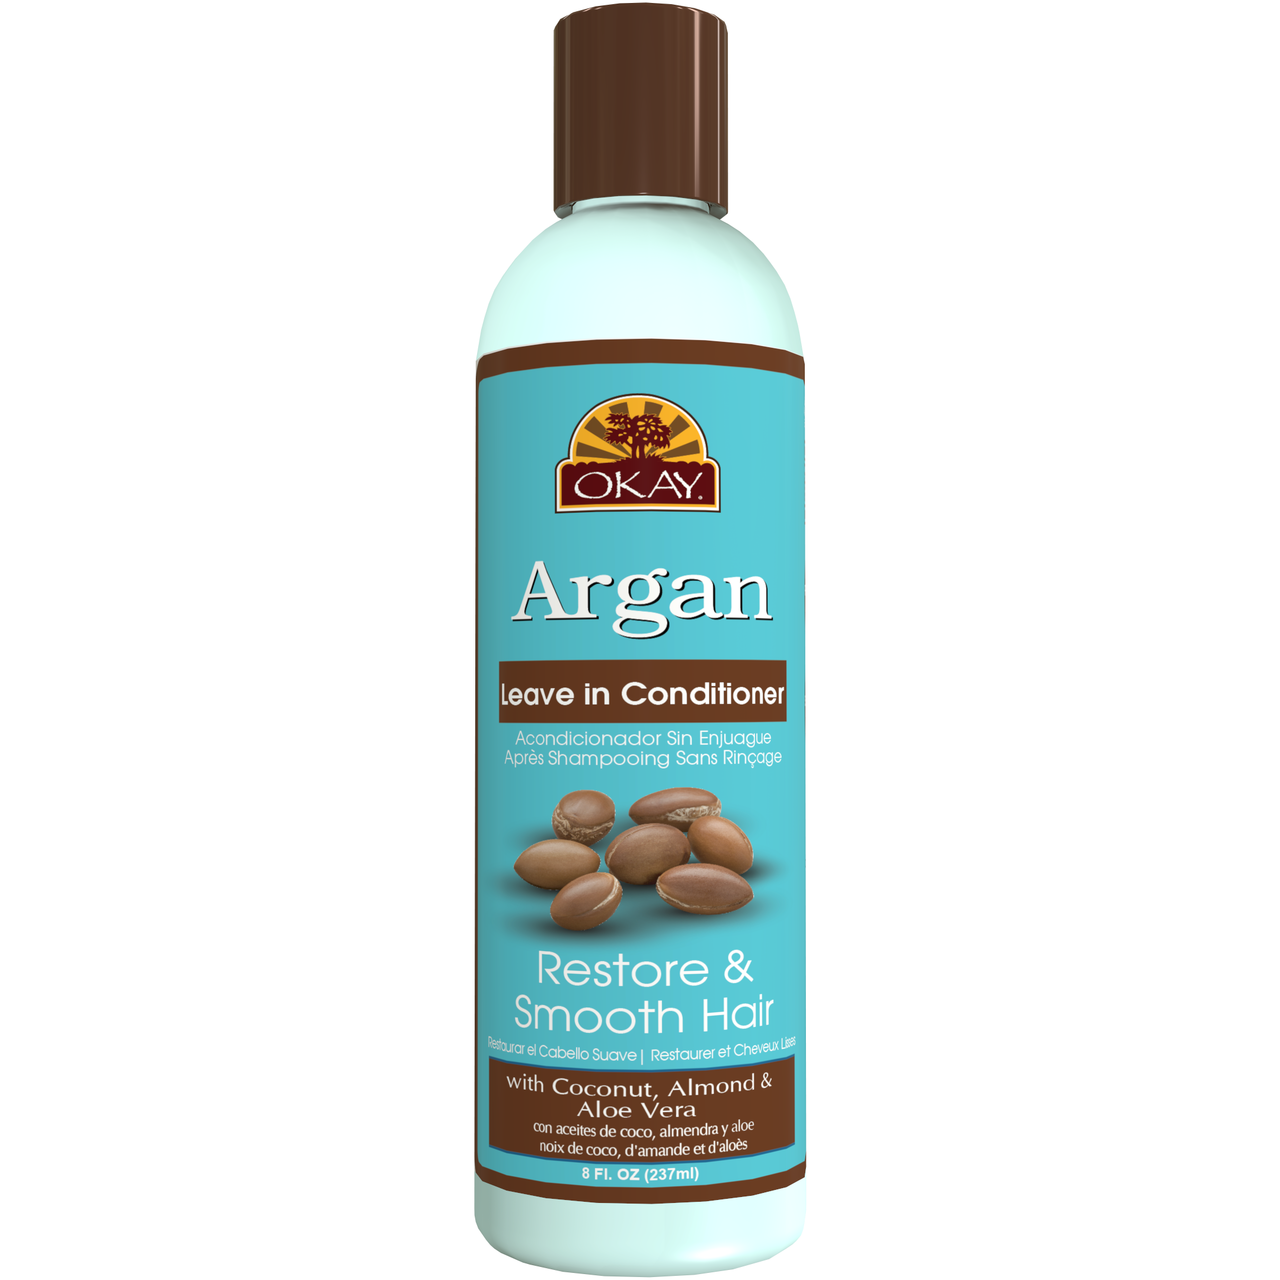 OKAY Argan Oil Leave In Conditioner, 8 Fluid Ounce - 4th Ave Market